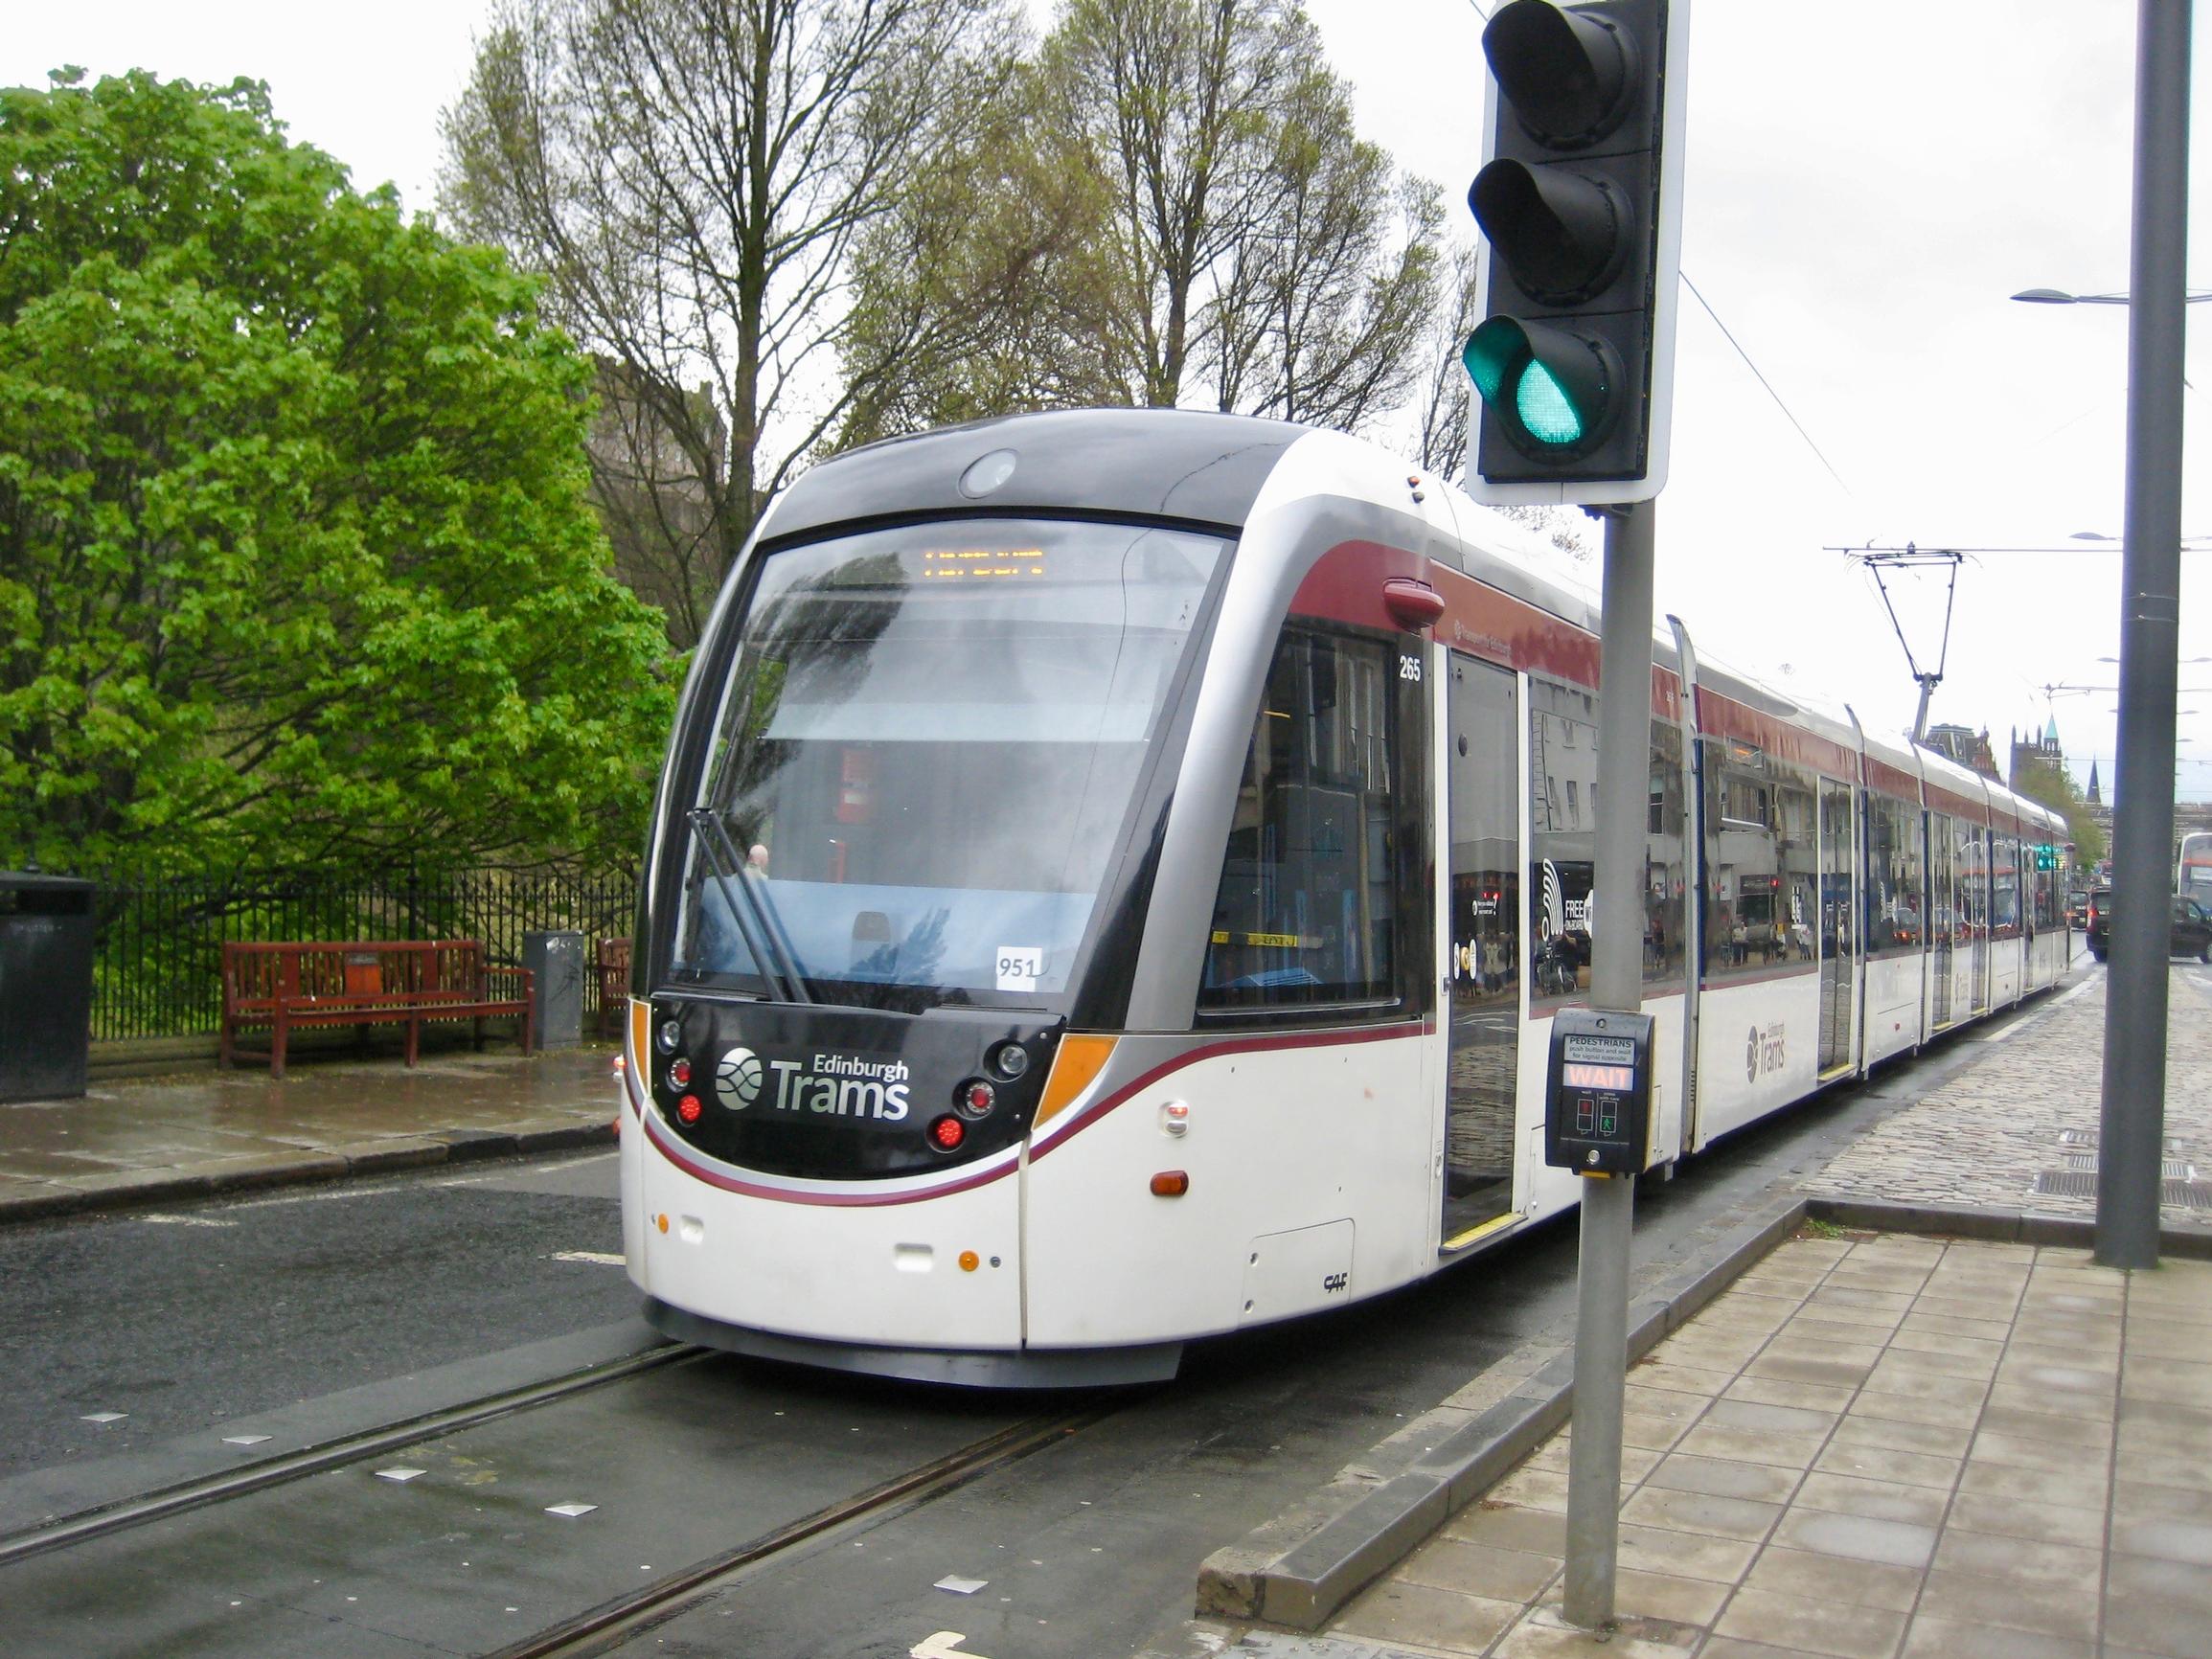 Merger could make city more vulnerable to industrial action, says Edinburgh Tram